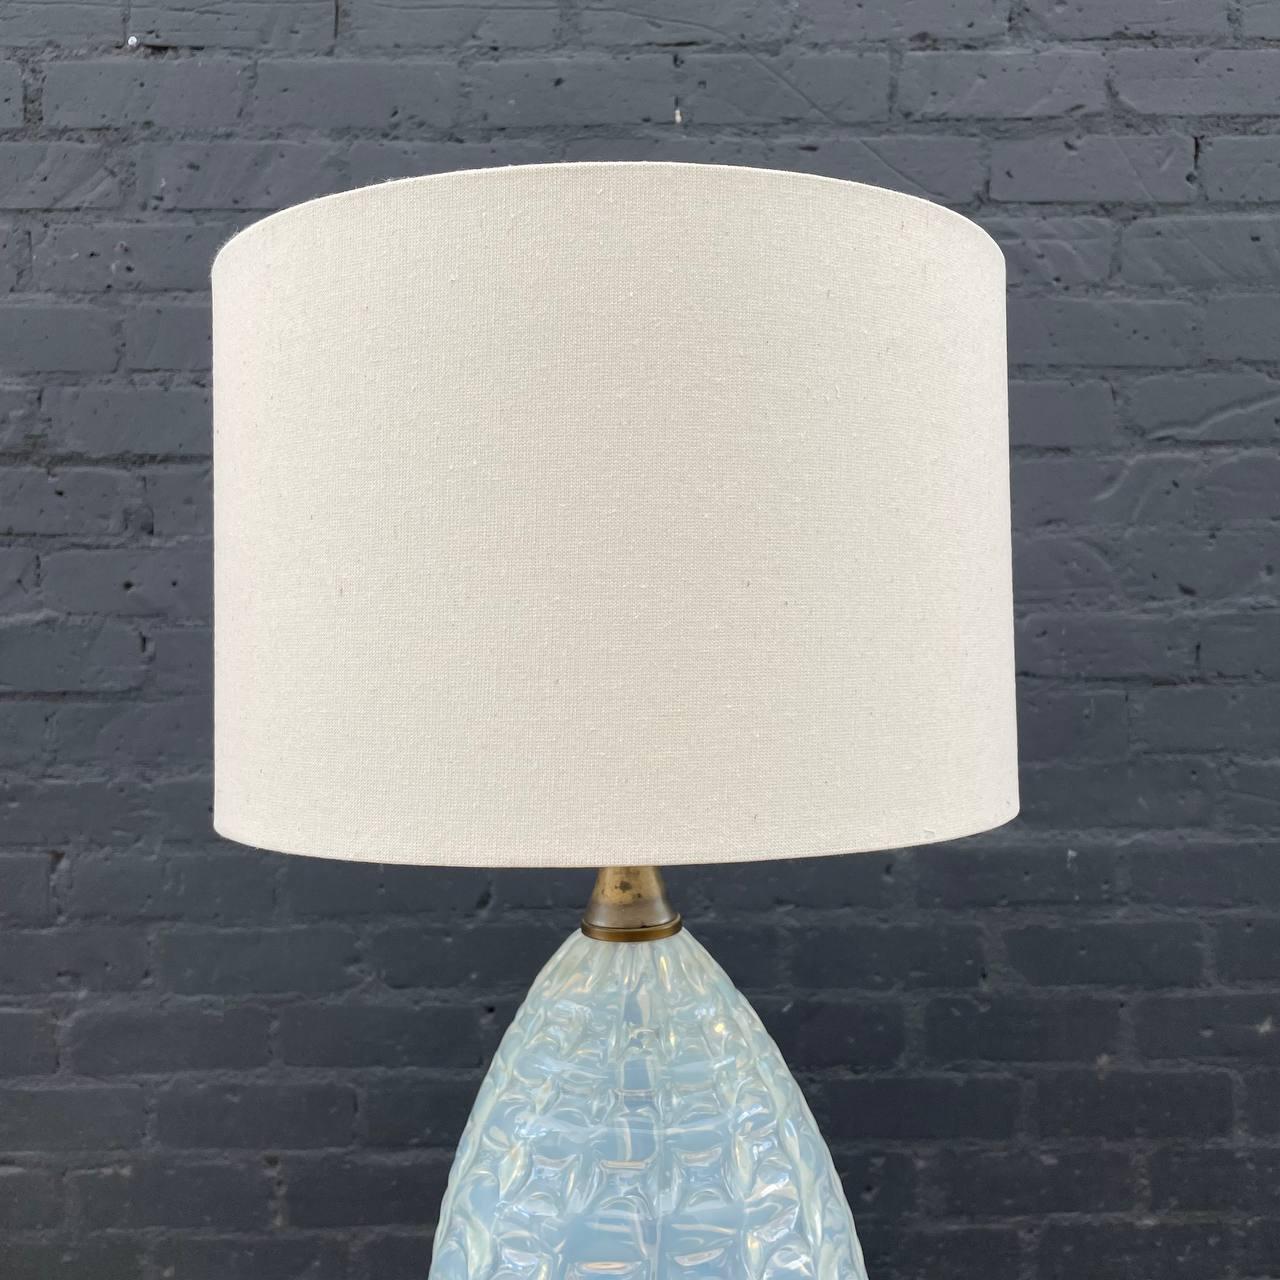 Vintage Italian Murano Glass Table Lamp with Brass Accent In Good Condition For Sale In Los Angeles, CA